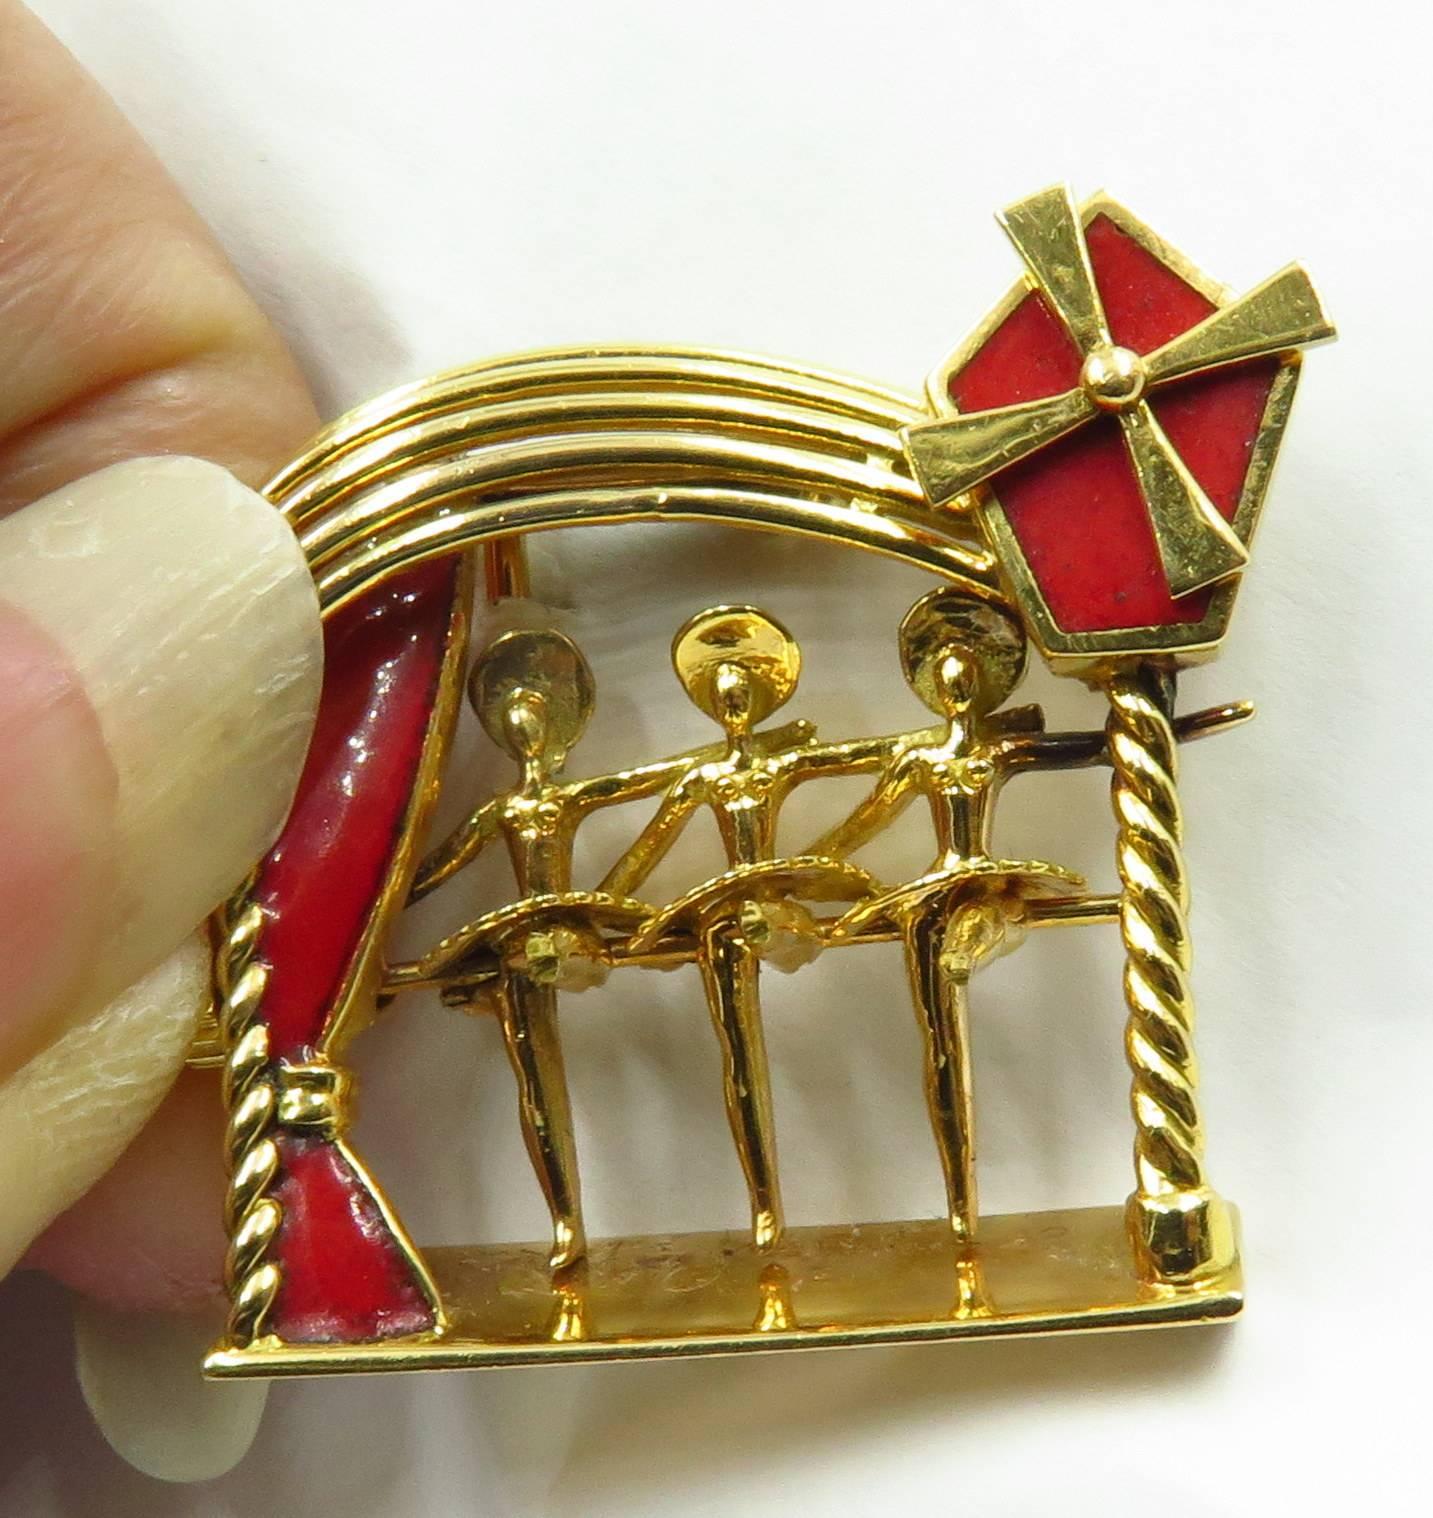 This art deco French pin is the most superbly designed, yet classy/kitschy, unisex pin in the history of the world...(in my humble opinion that is). Turn the knob (looks like a crown on a watch) to the left of the girls to make them kick their legs.